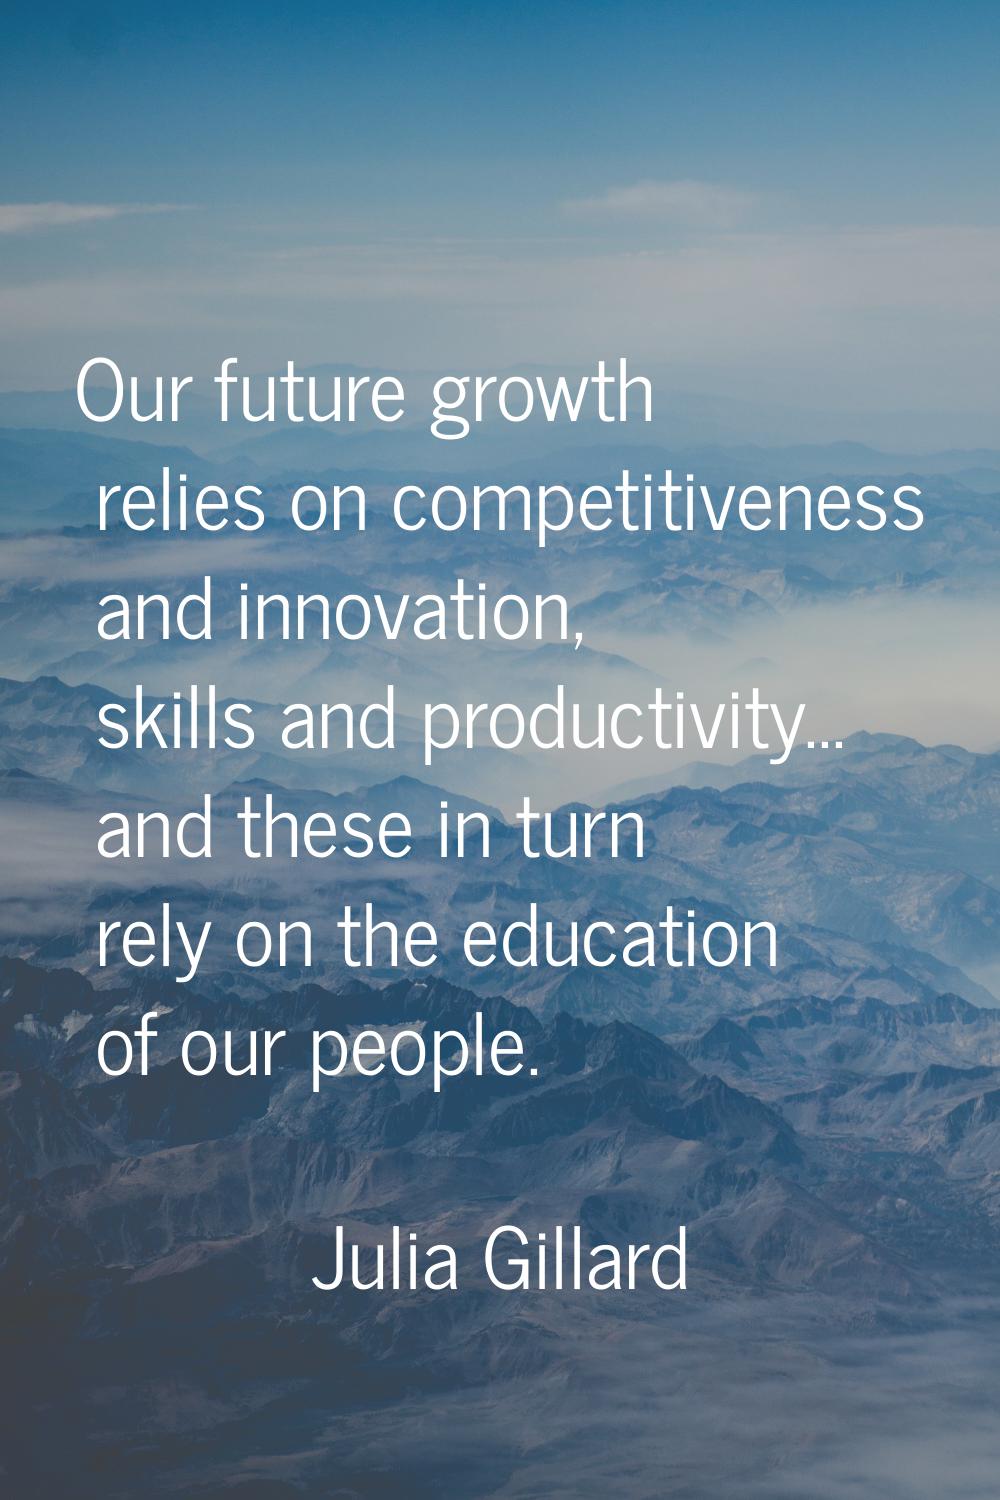 Our future growth relies on competitiveness and innovation, skills and productivity... and these in